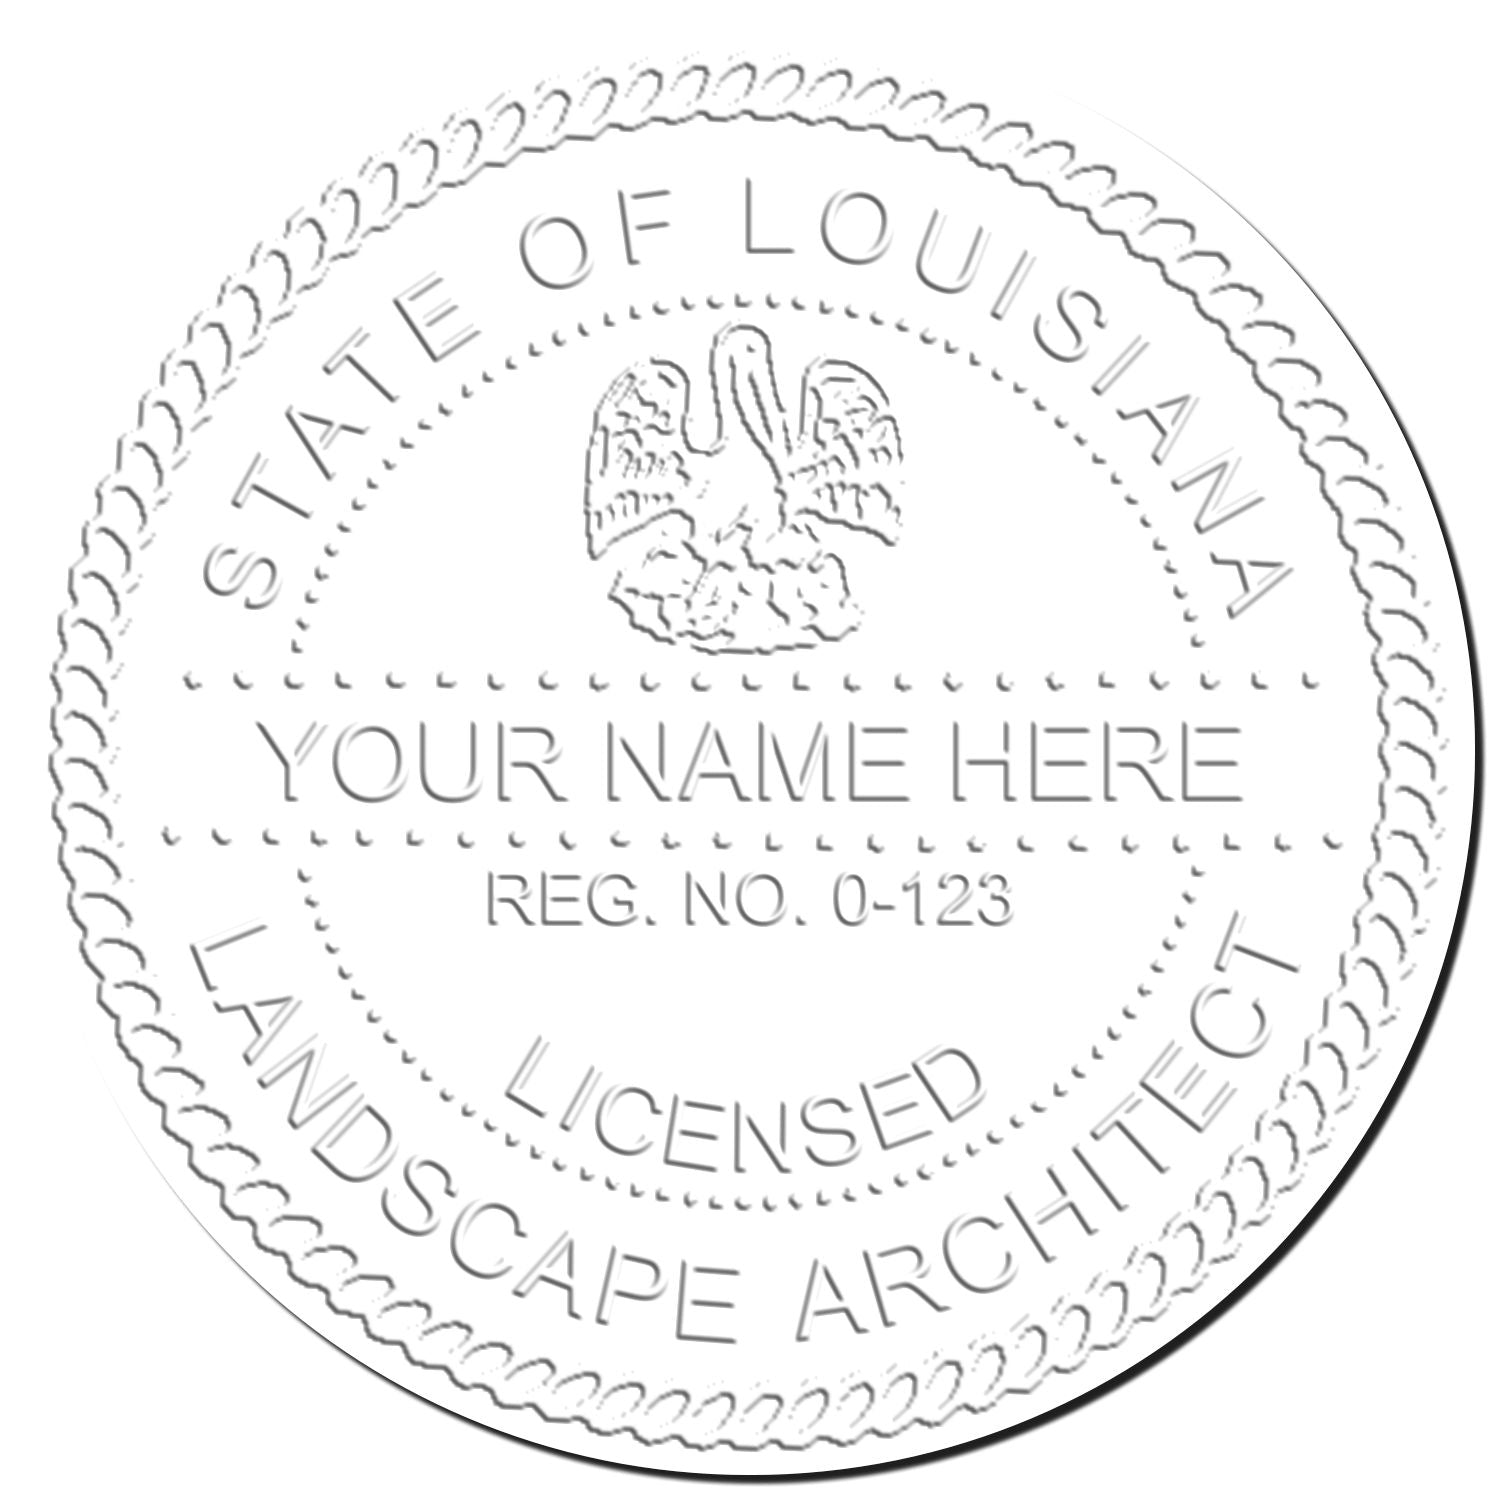 This paper is stamped with a sample imprint of the Gift Louisiana Landscape Architect Seal, signifying its quality and reliability.